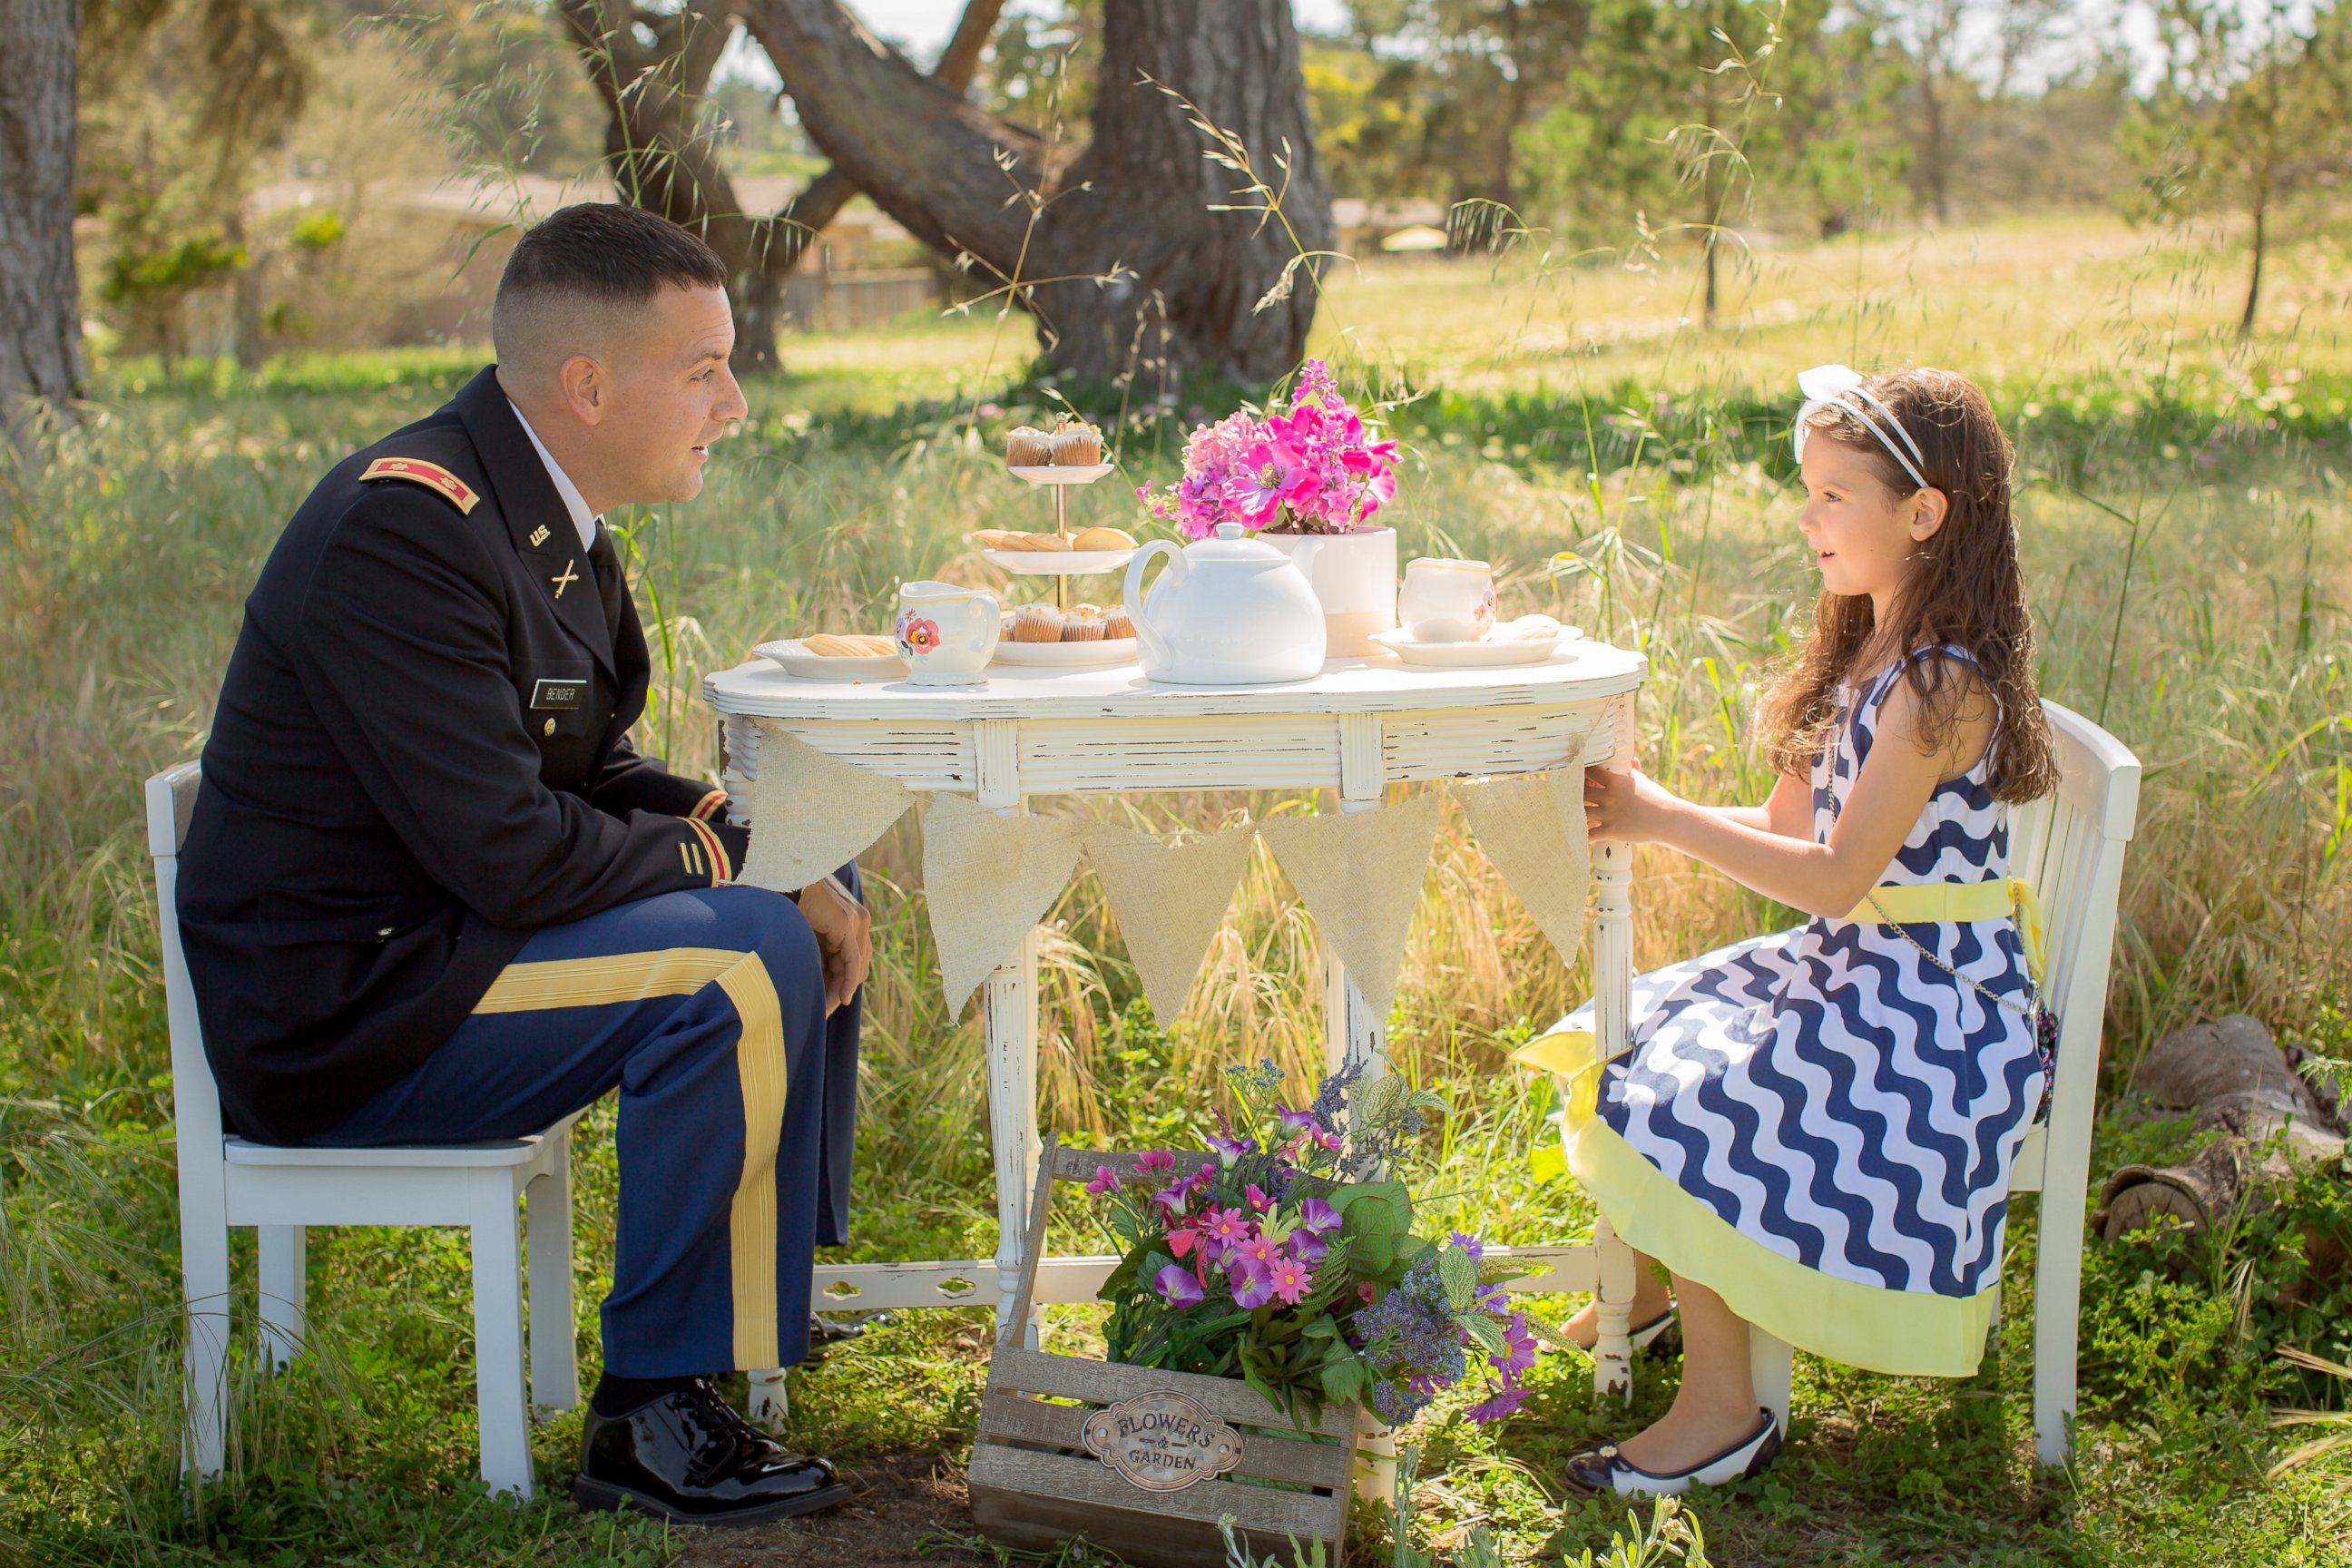 PHOTO: Professional photographer Vanessa Hicks captures military personnel with their children in her popular "Military Tea Time Mini Sessions."